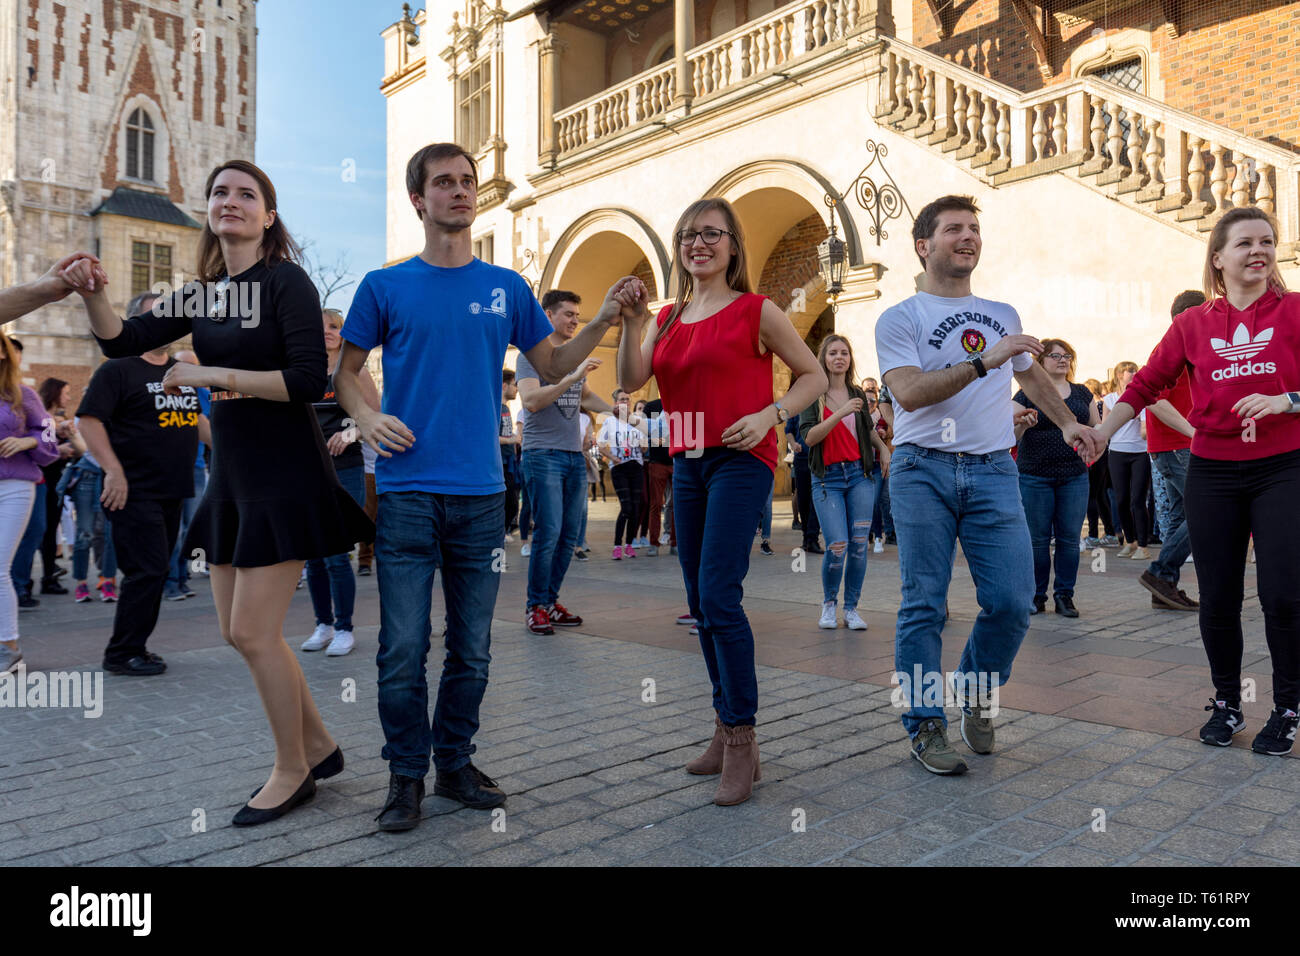 Dance Flash Mob High Resolution Stock Photography and Images - Alamy